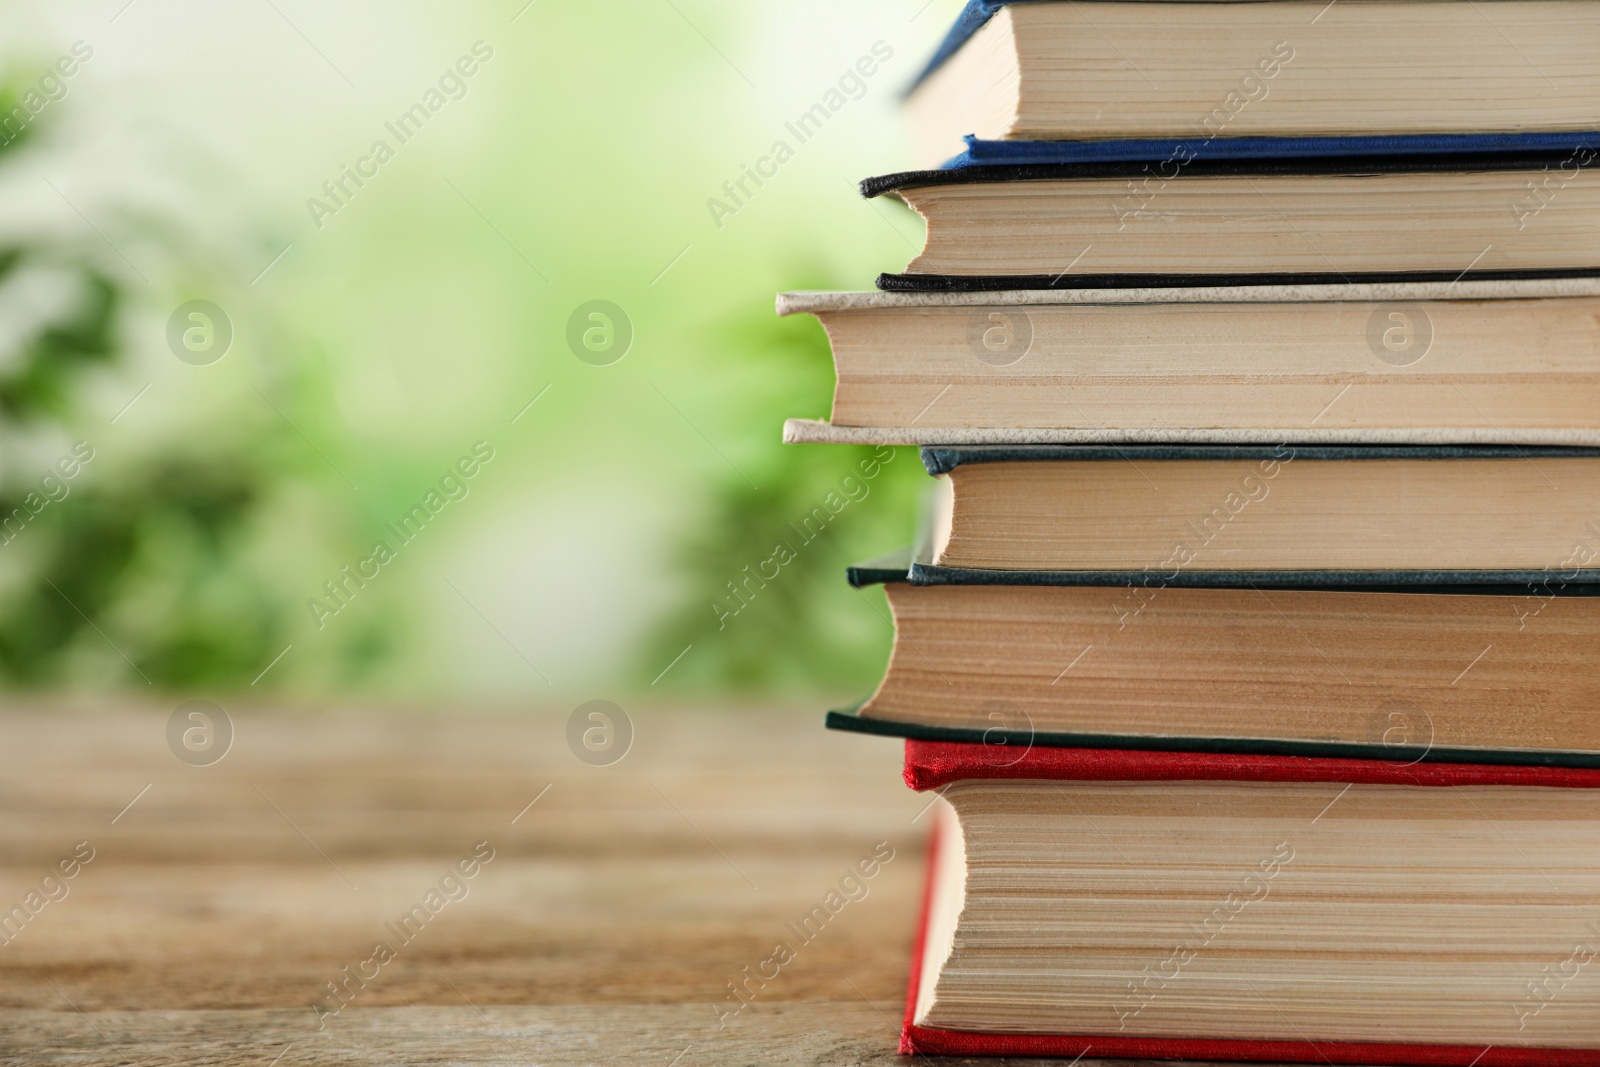 Photo of Stack of hardcover books on wooden table against blurred background. Space for text